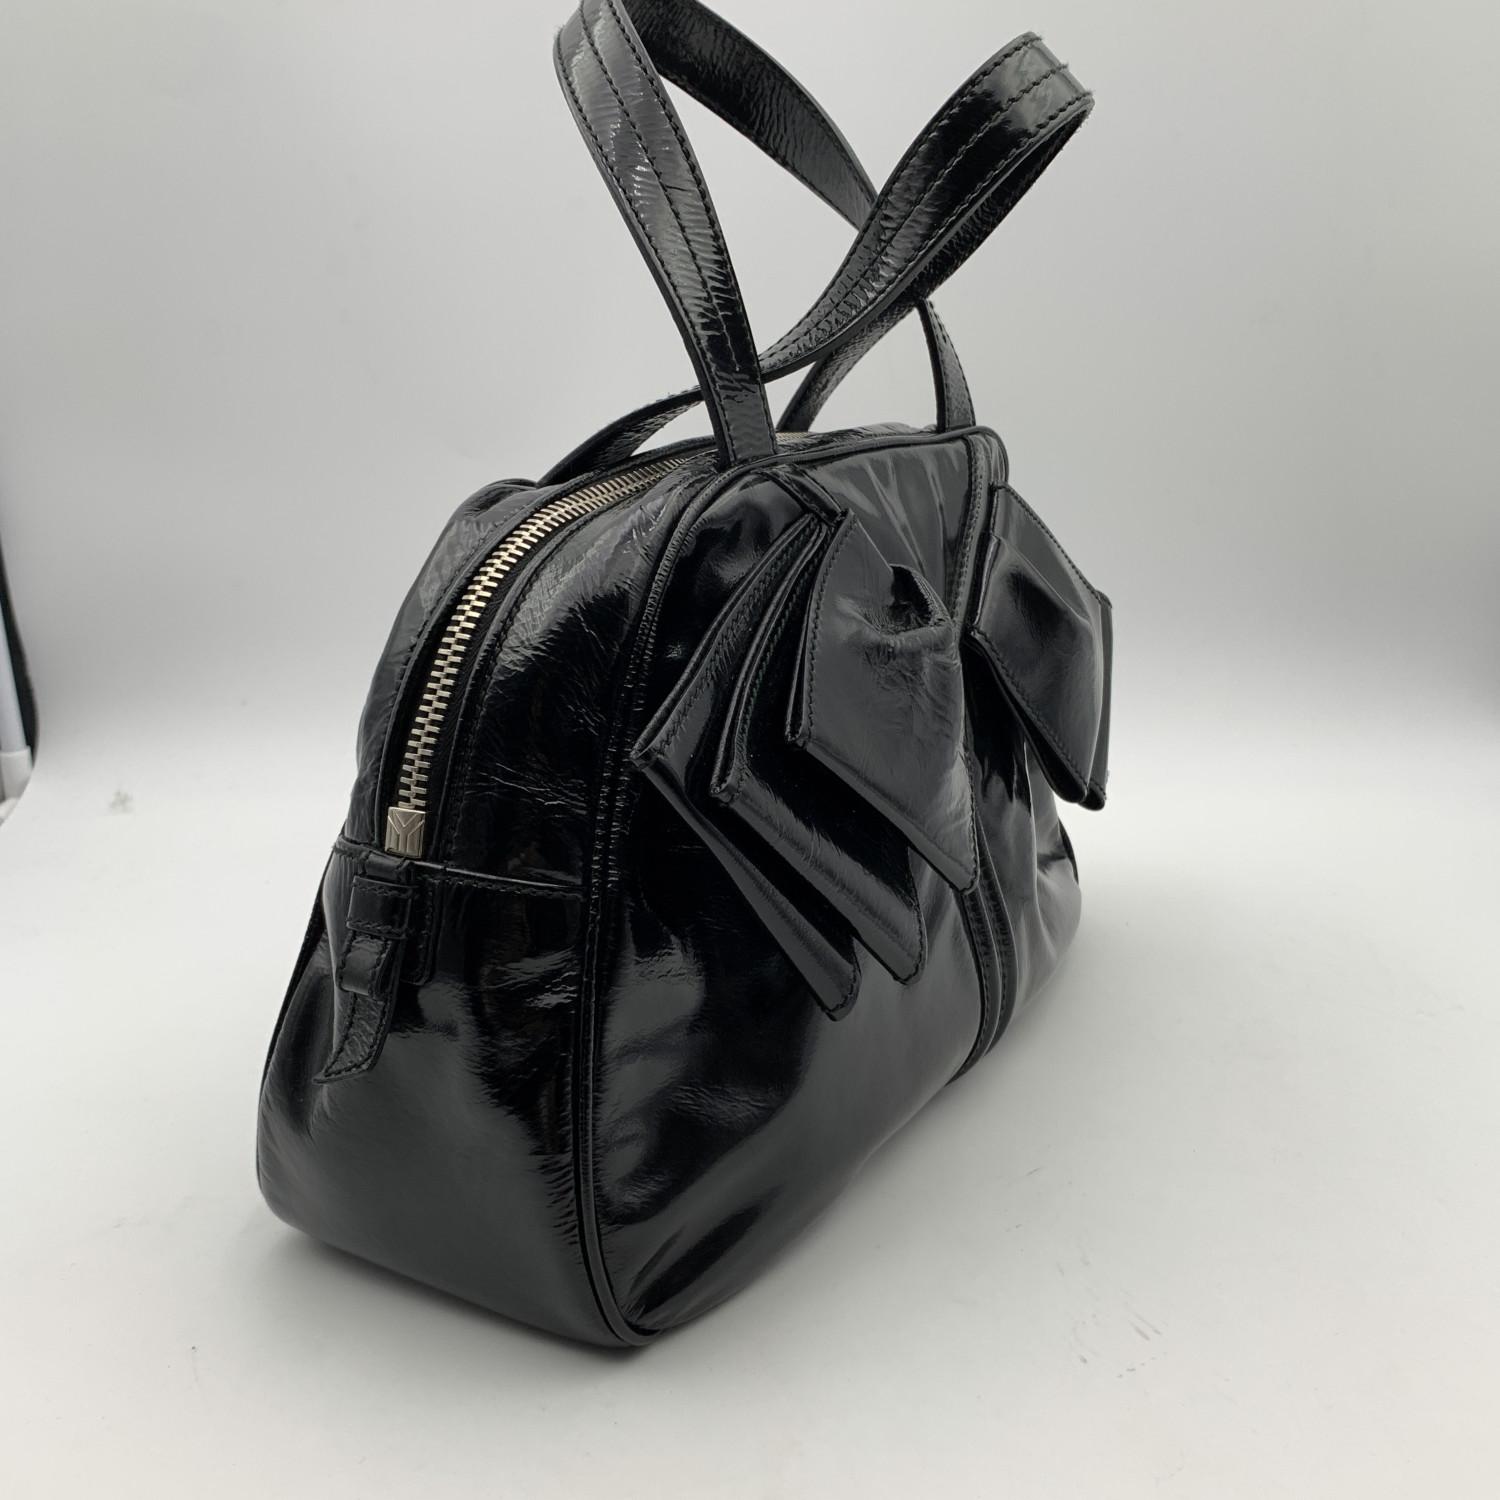 patent leather ysl bag